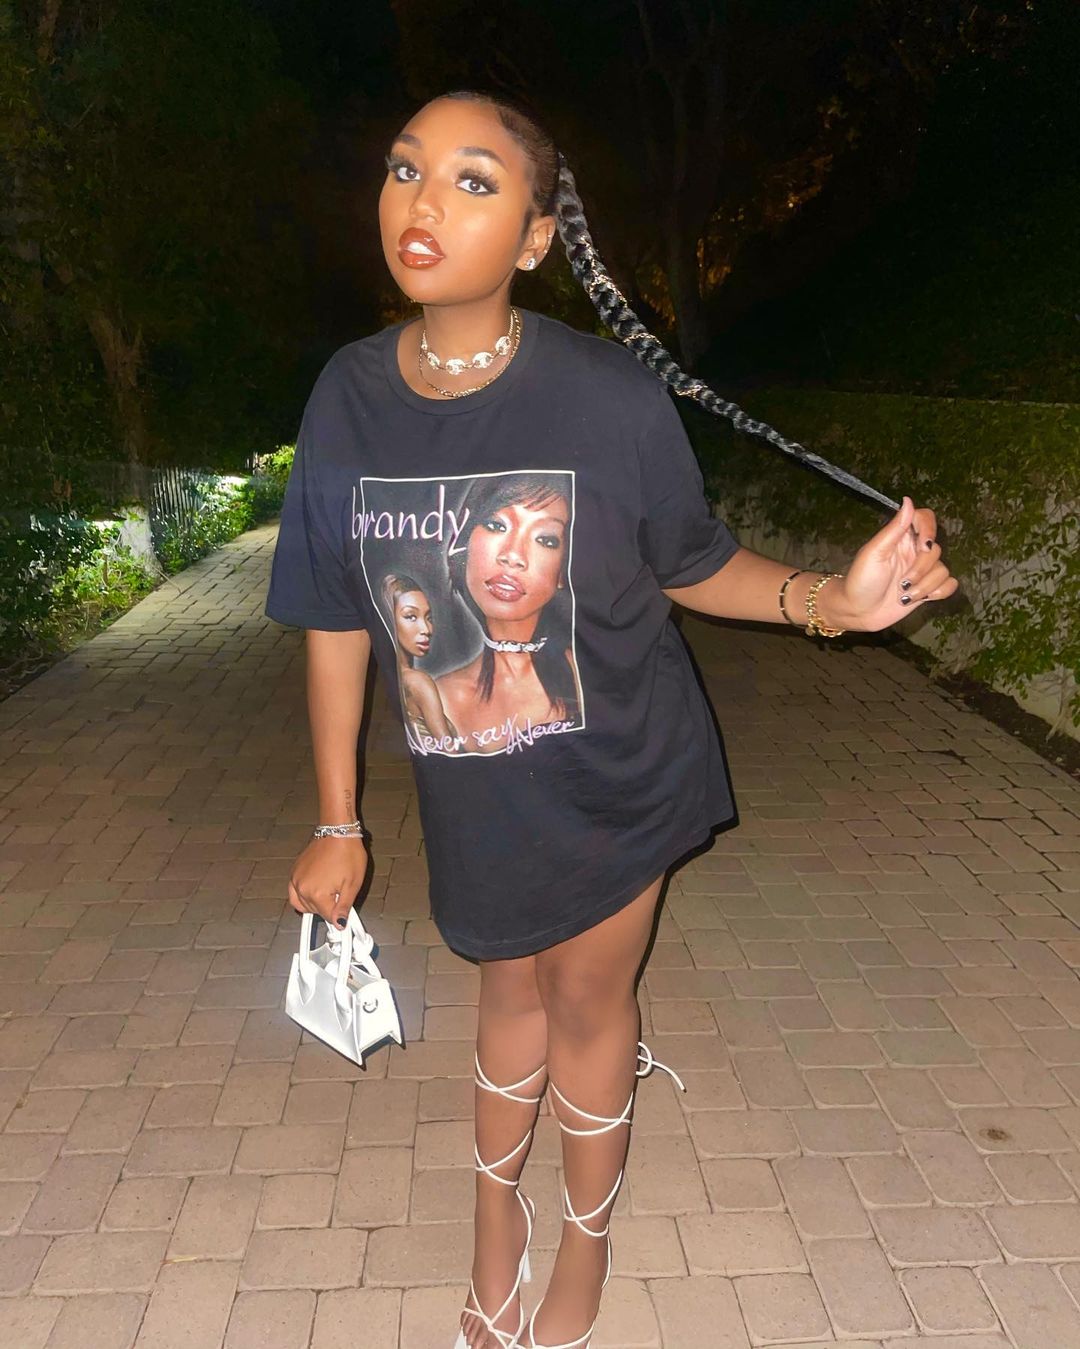 Brandy’s Daughter, Sy’Rai, Pays Homage To Her Mom With A Nostalgic T-Shirt